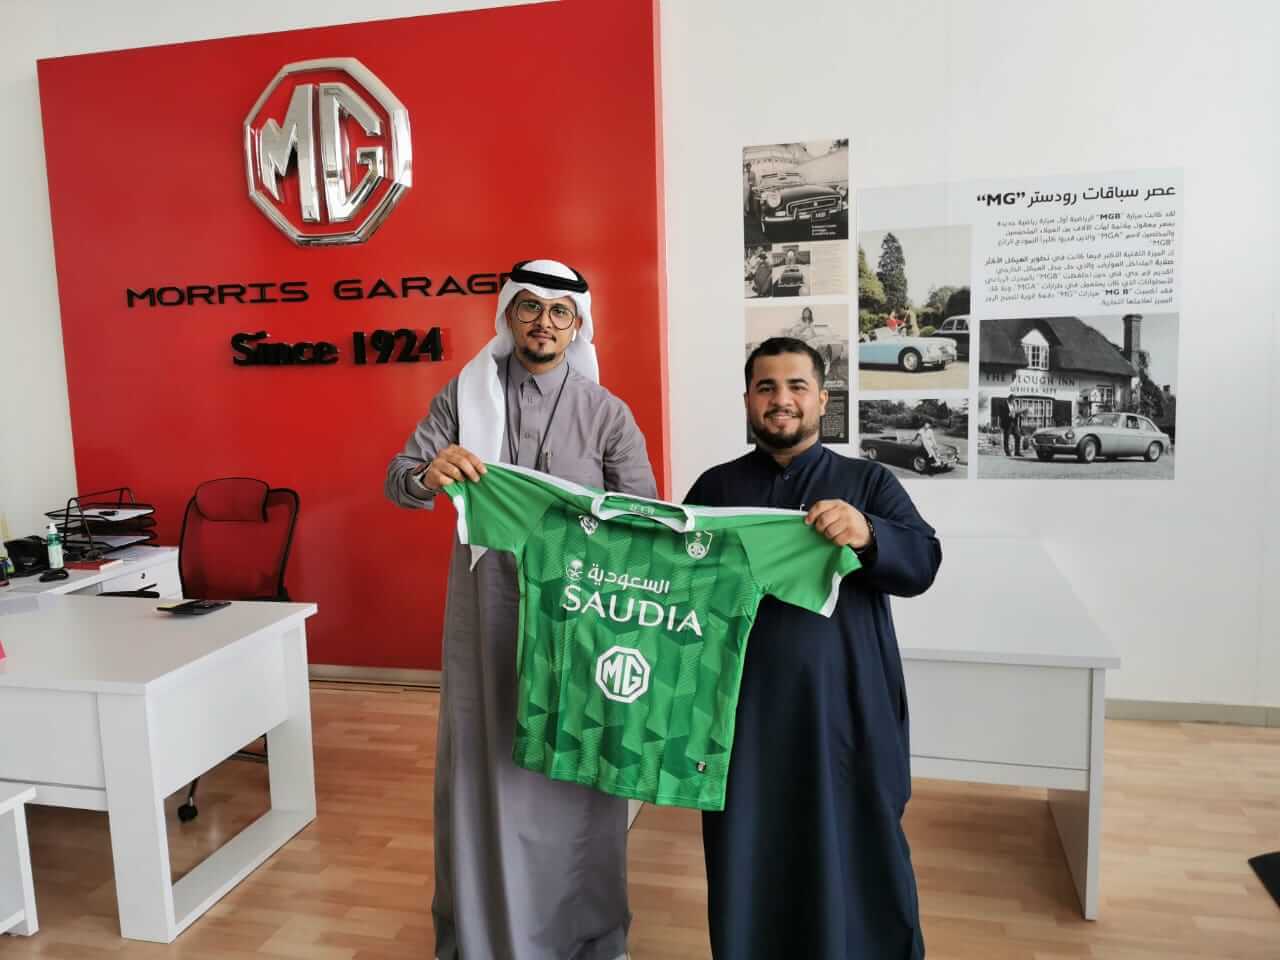 MG continues to support the Saudi National Club championships